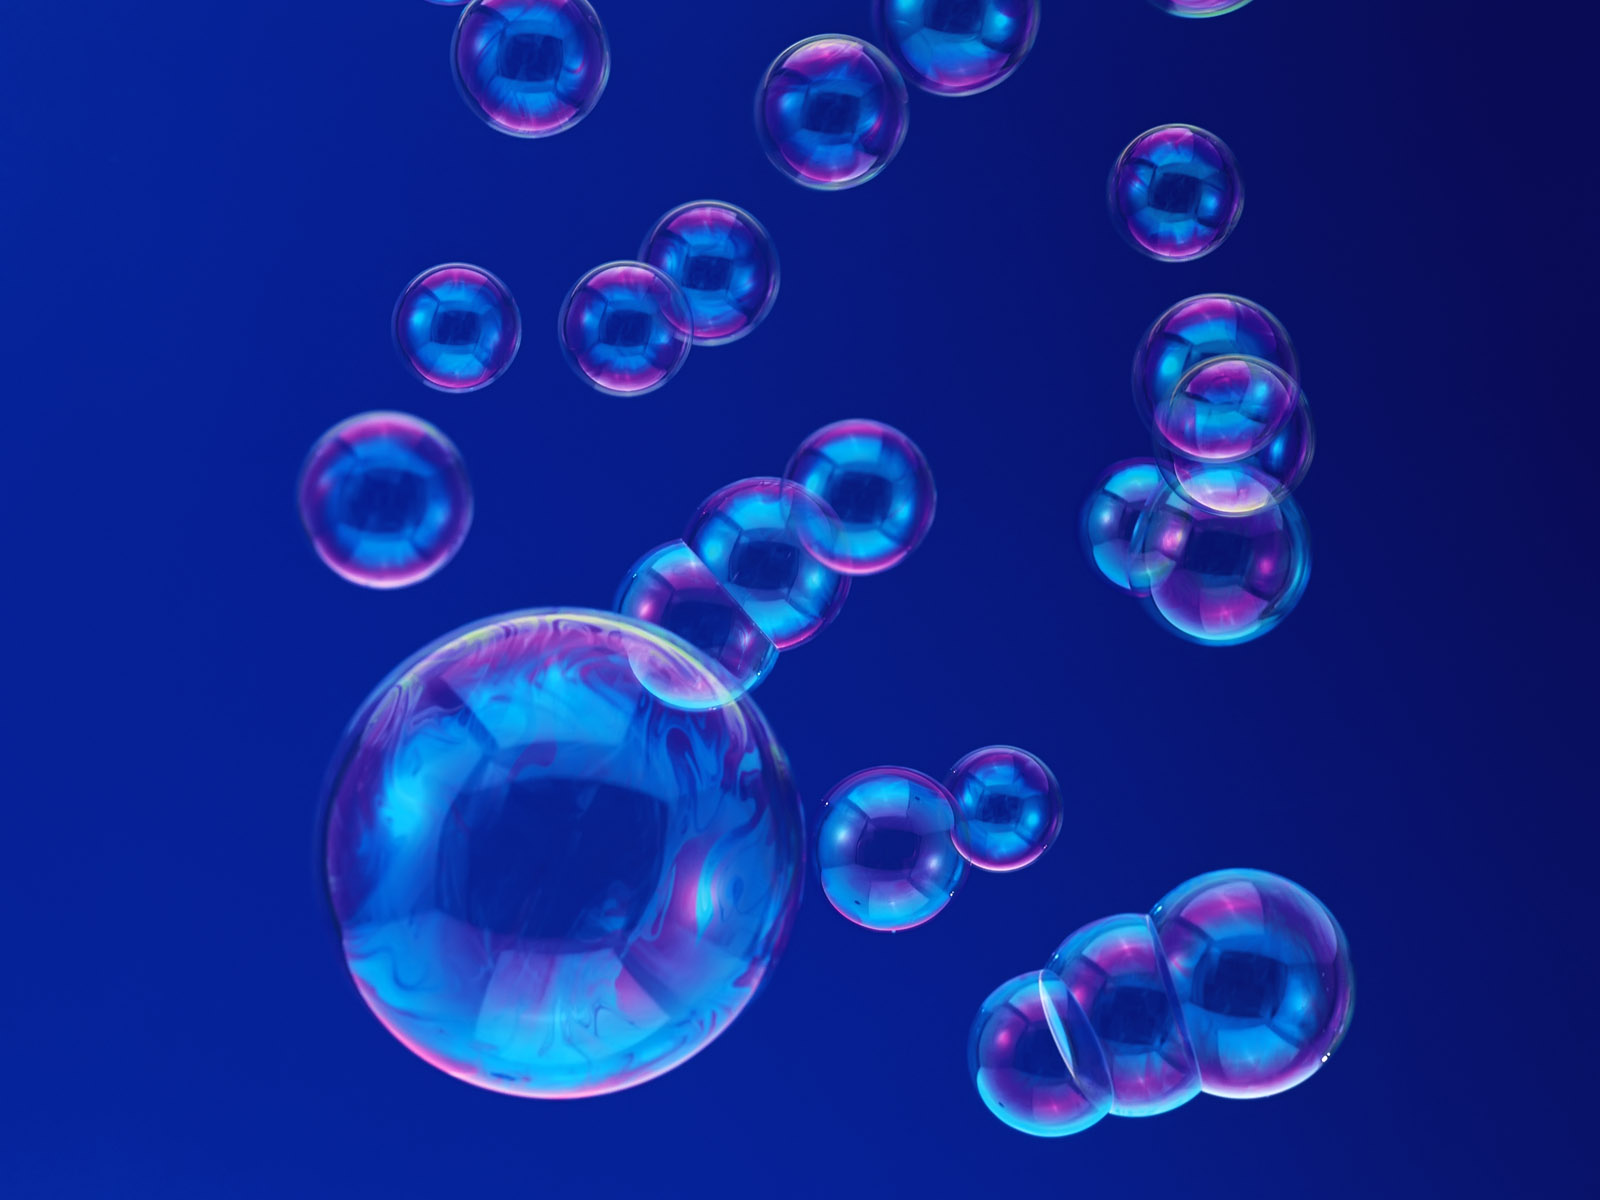 Abstract Water And Bubbles High Quality Background Pictures